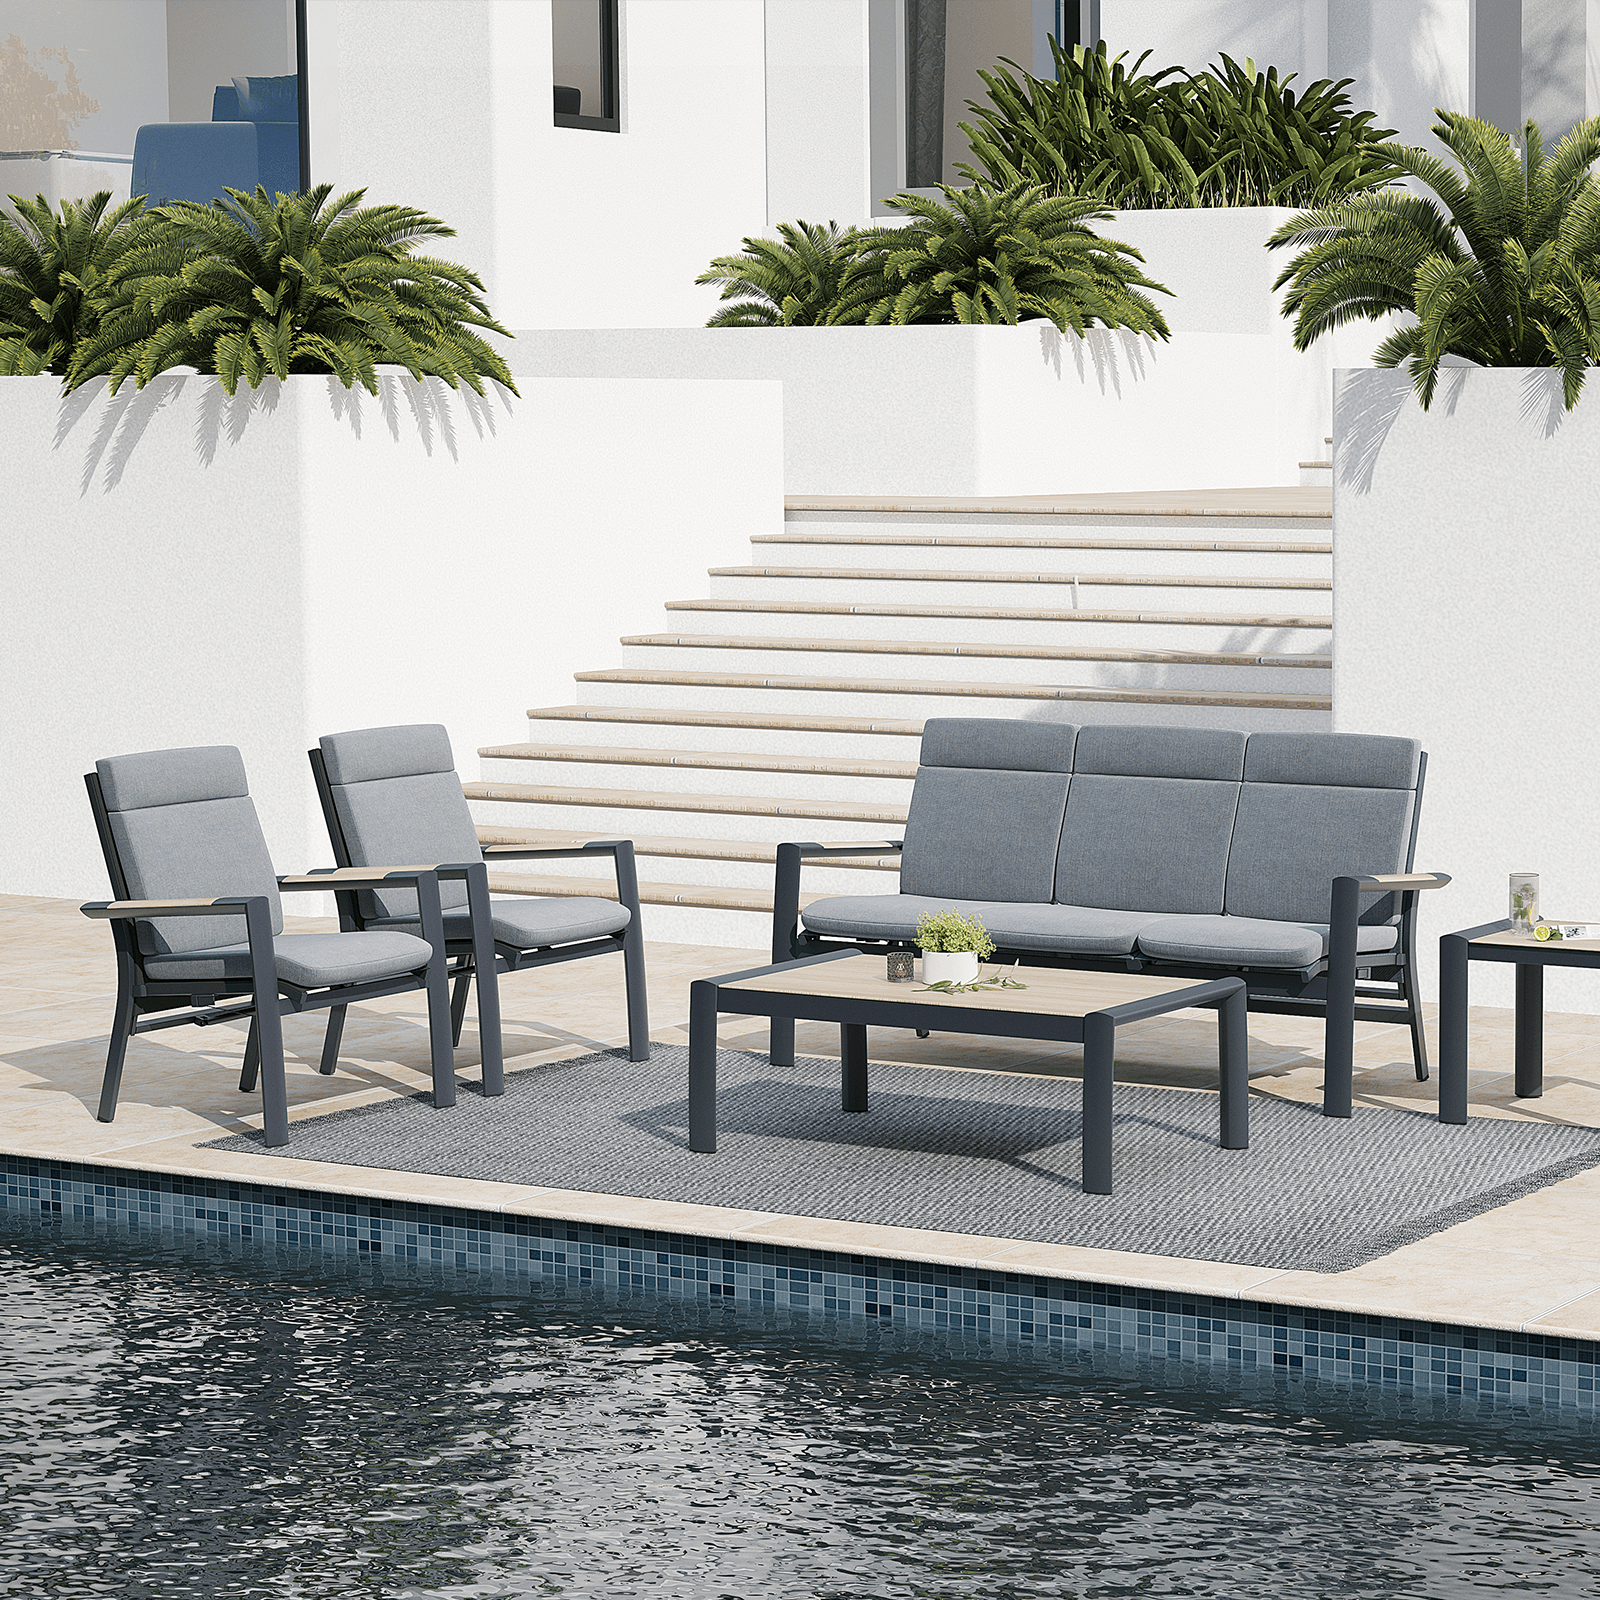 Capri Modern Aluminum Outdoor Furniture, 5-Piece grey outdoor conversation set with grey cushions, 1 three-seater sofa with adjustable backrest, 2 armchairs with adjustable backrest, 1 rectangle coffee table, 1 square side table, by the pool - Jardina Furniture